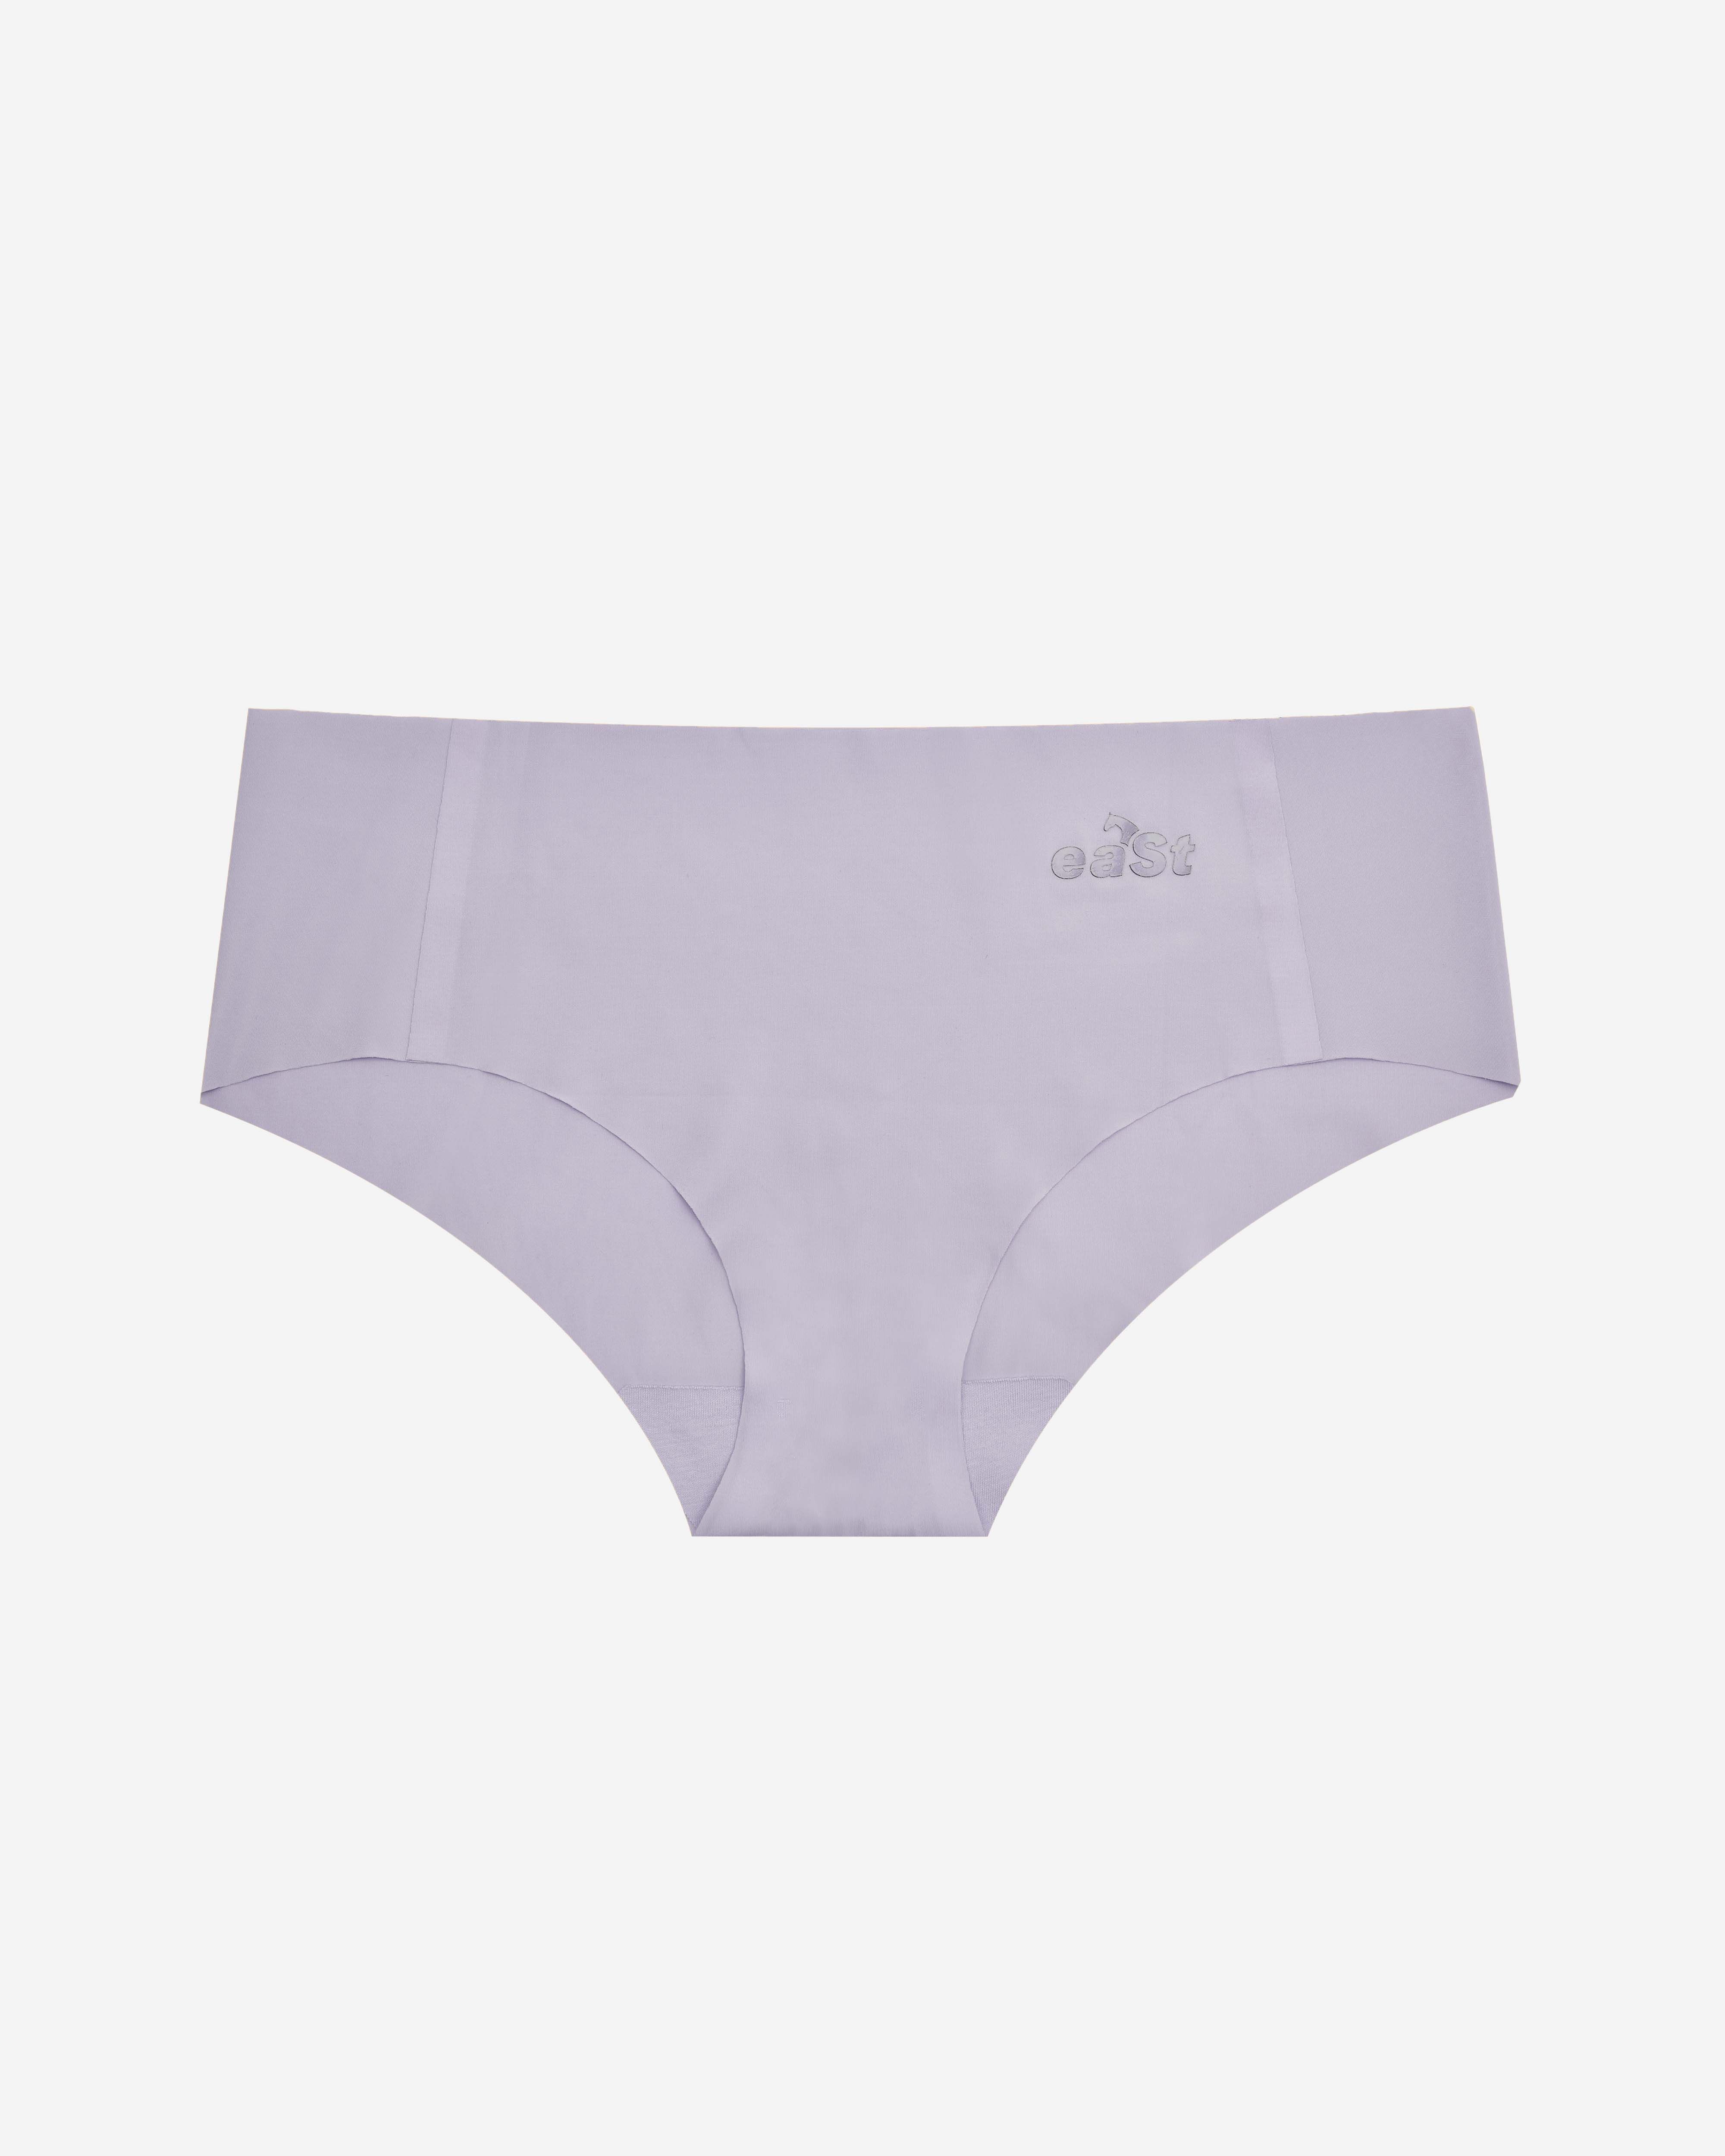 eaSt Performance Panty | Lavender | 2XS